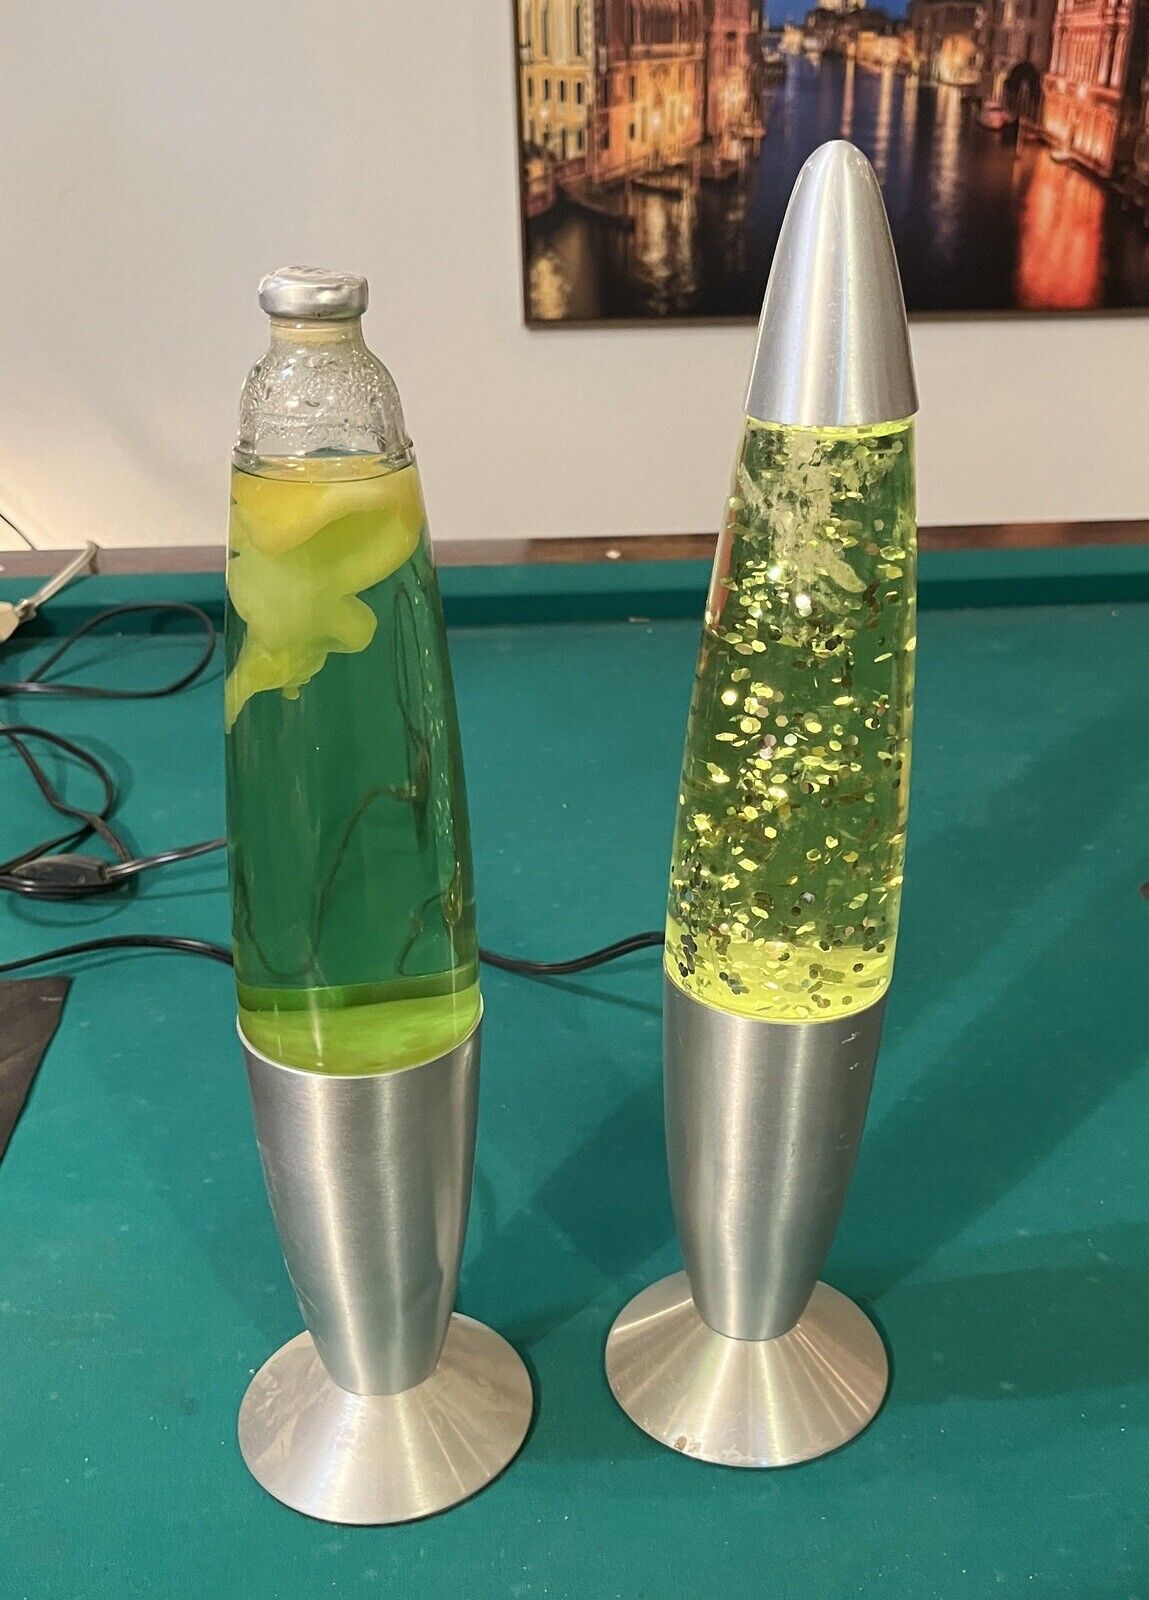 2 Vintage Lava Lamps/1 Lava/ 1 Glitter, 1 Needs New Bulb/Art Lamps/Tested Works